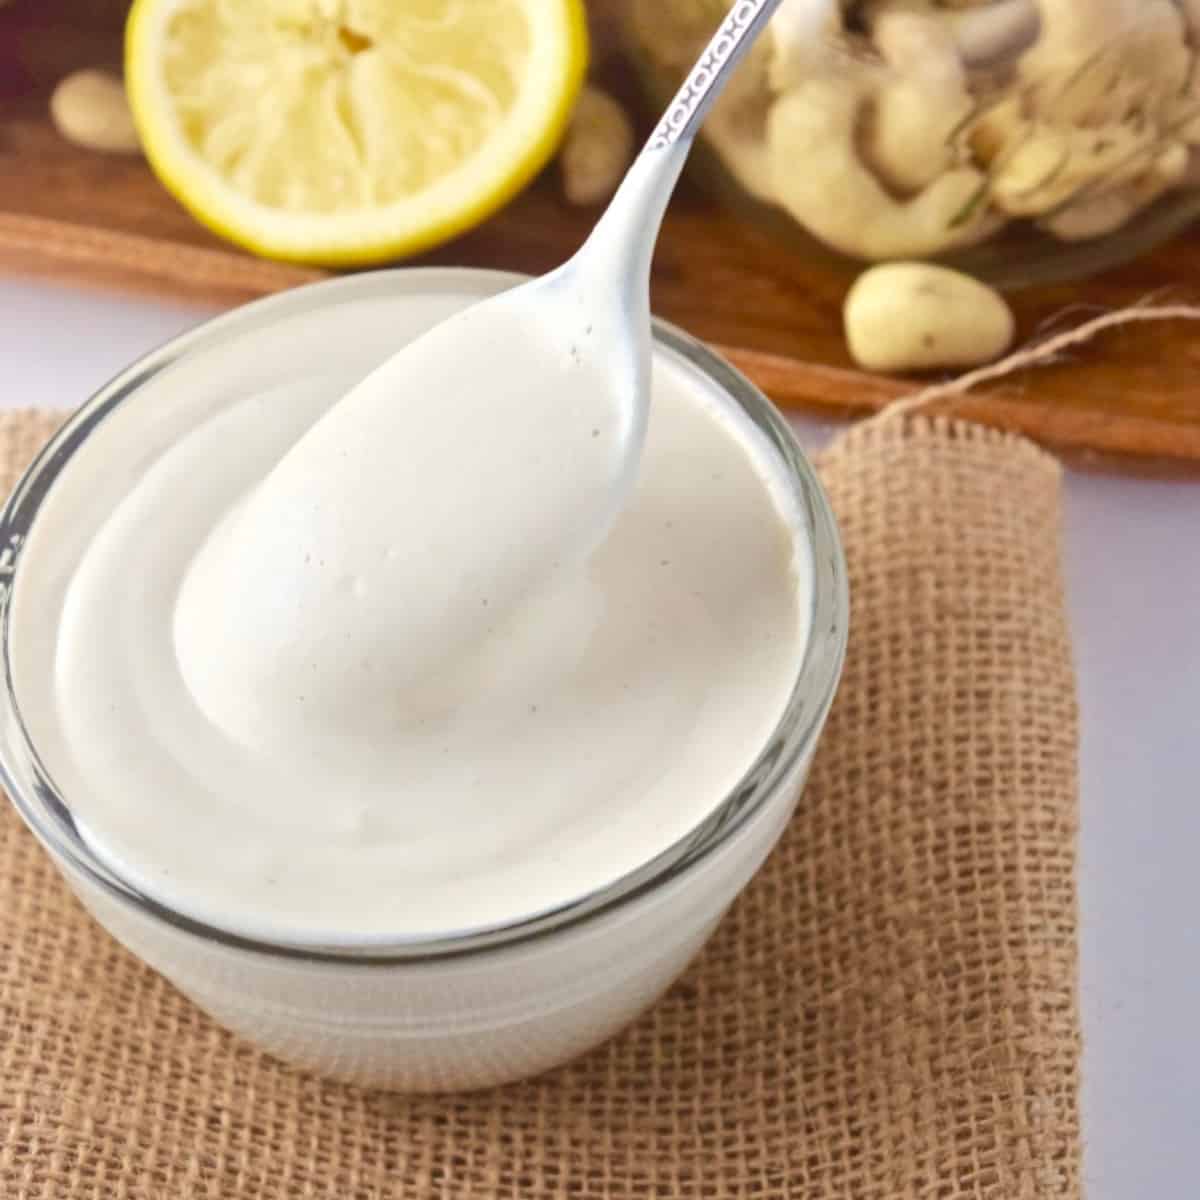 Cashew sour cream in bowl with spoon.